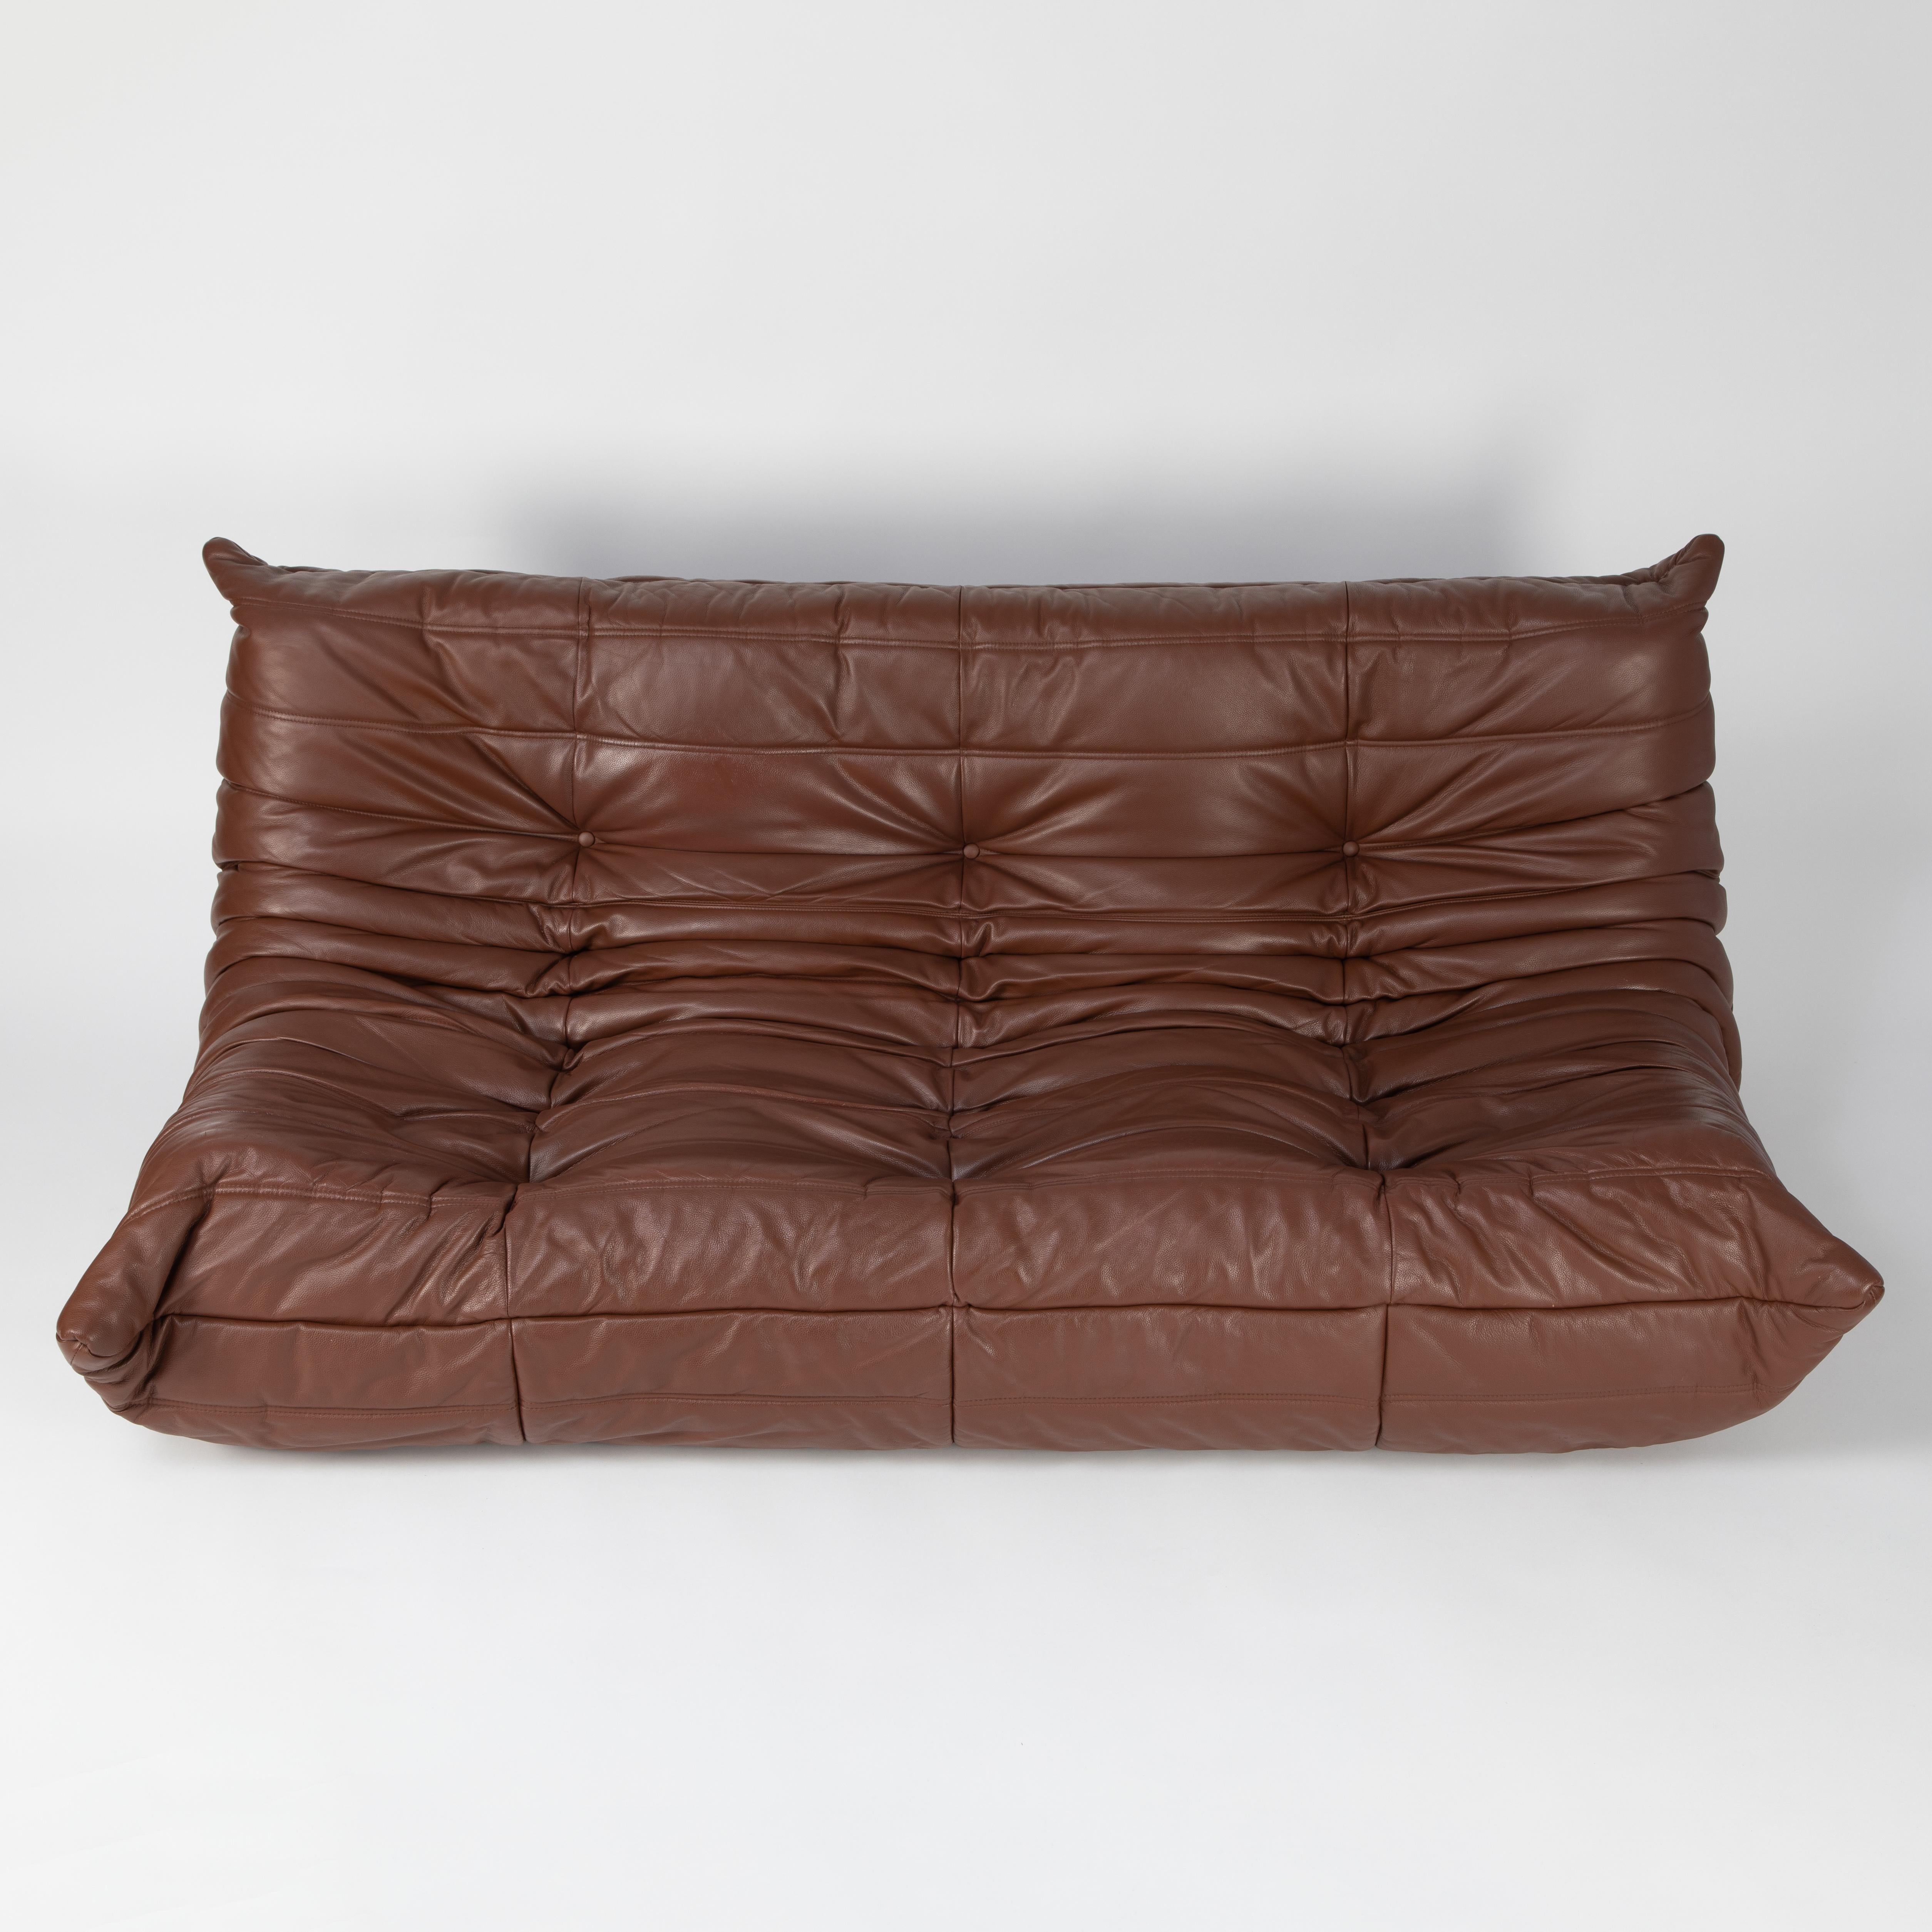 Extraordinarily comfortable Classic sofa from French designer Michel Ducaroy's Togo line for Ligne Roset. Designed in 1973, the Togo collection features ergonomic all-foam forms with quilted covers, this example in a lovely whiskey-color leather.